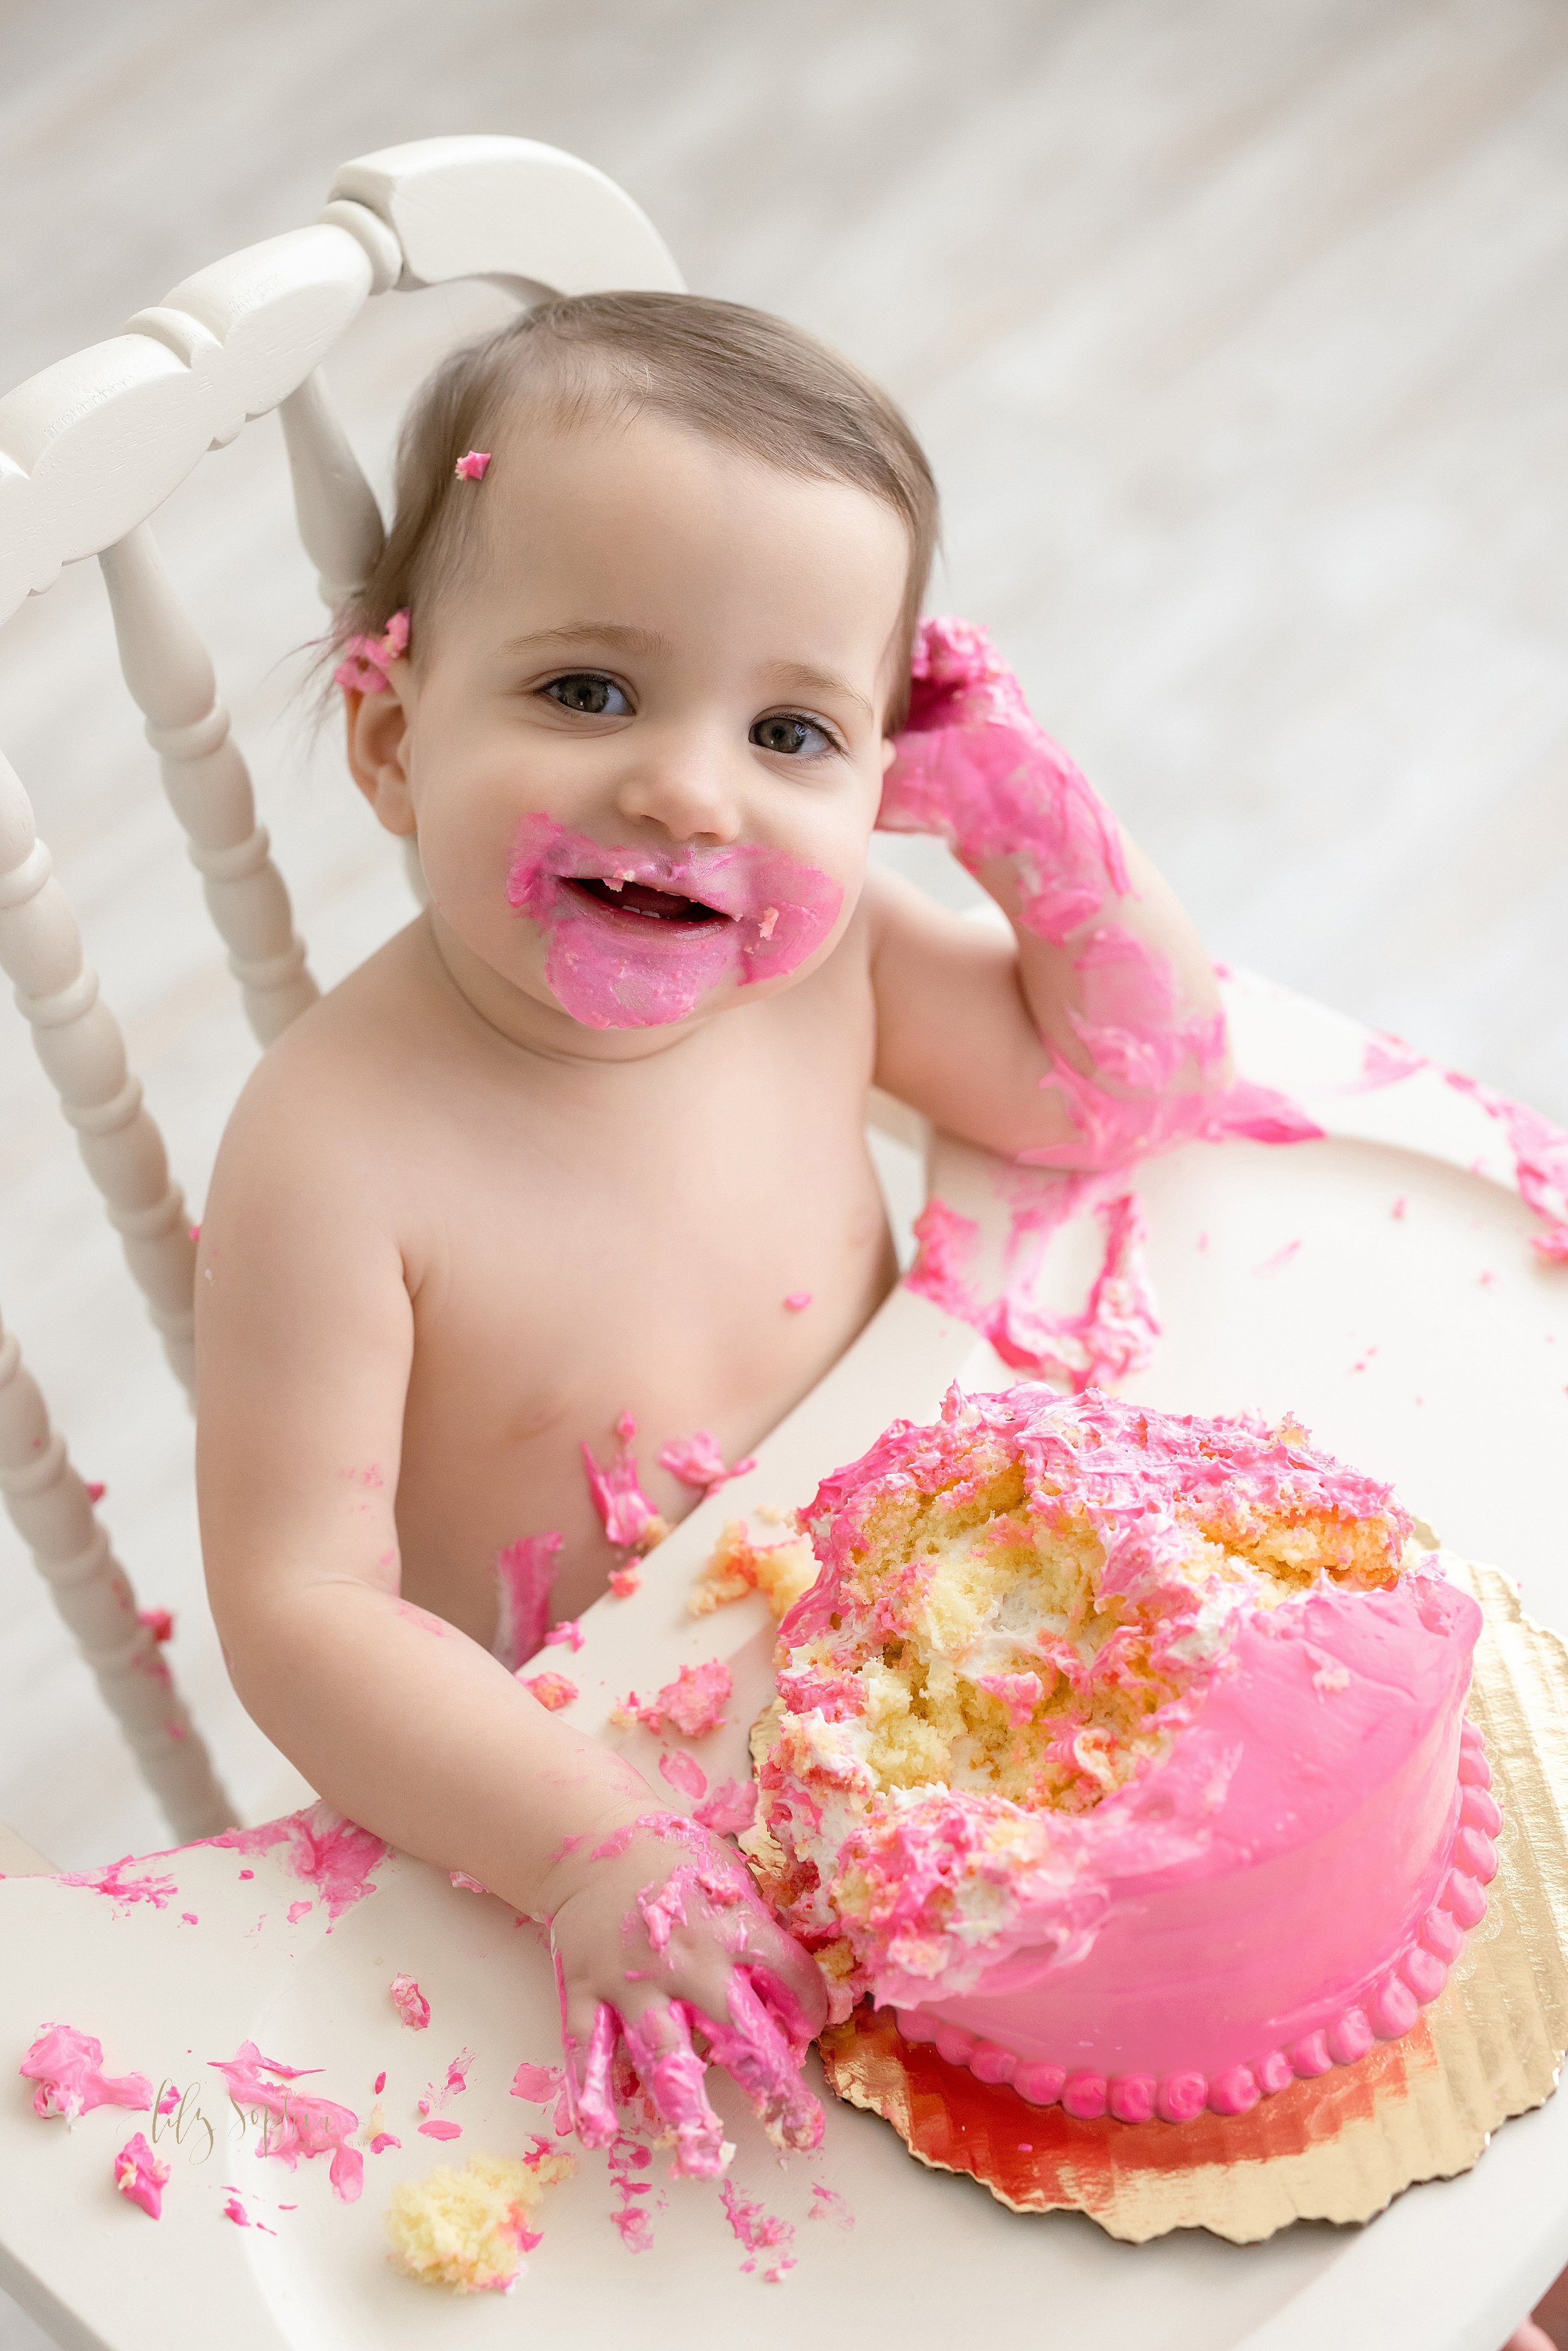  First birthday smash cake picture of a one year old little girl as she sits in an antique high chair smiling with pink icing surrounding her mouth and covering her right hand and arm taken in a natural light studio near Old Fourth Ward in Atlanta, G